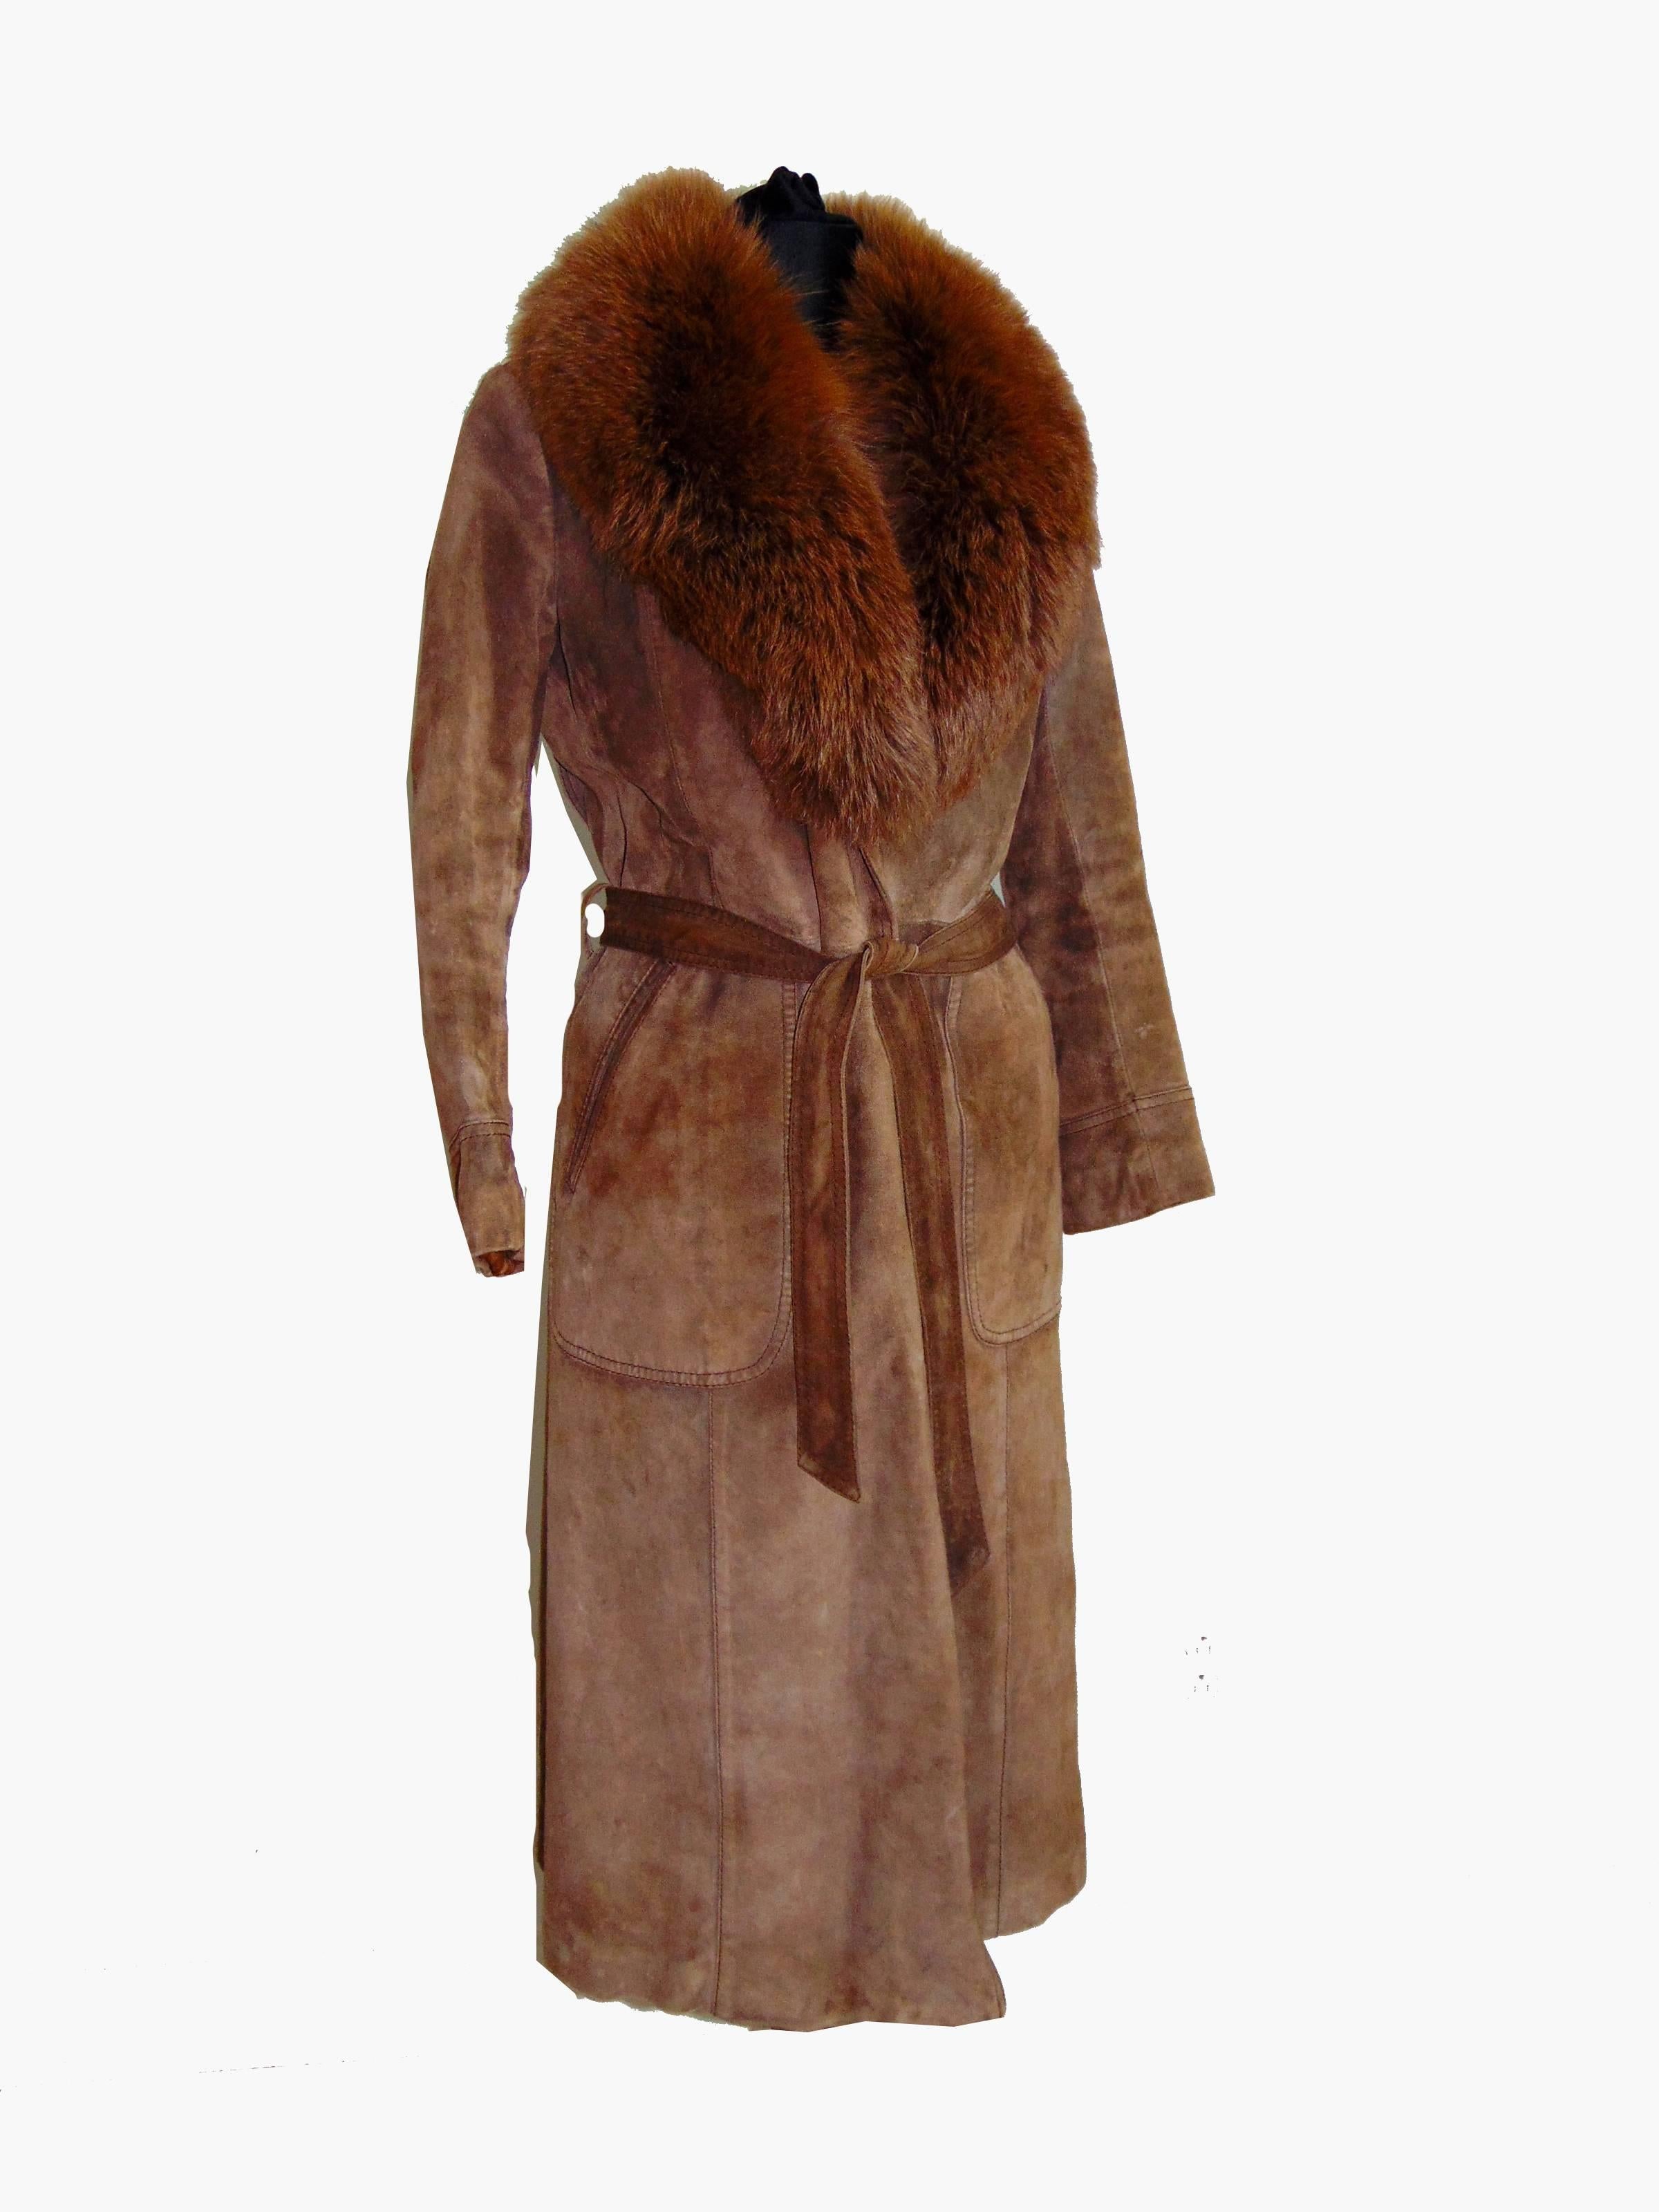 This fabulous vintage coat is so 70s Foxy Brown! Made by Rafael Italy from light brown suede leather, it features a plush fur collar and is lined in what appears to be Rex rabbit fur. (no content label)   It fastens with a single  button and it's